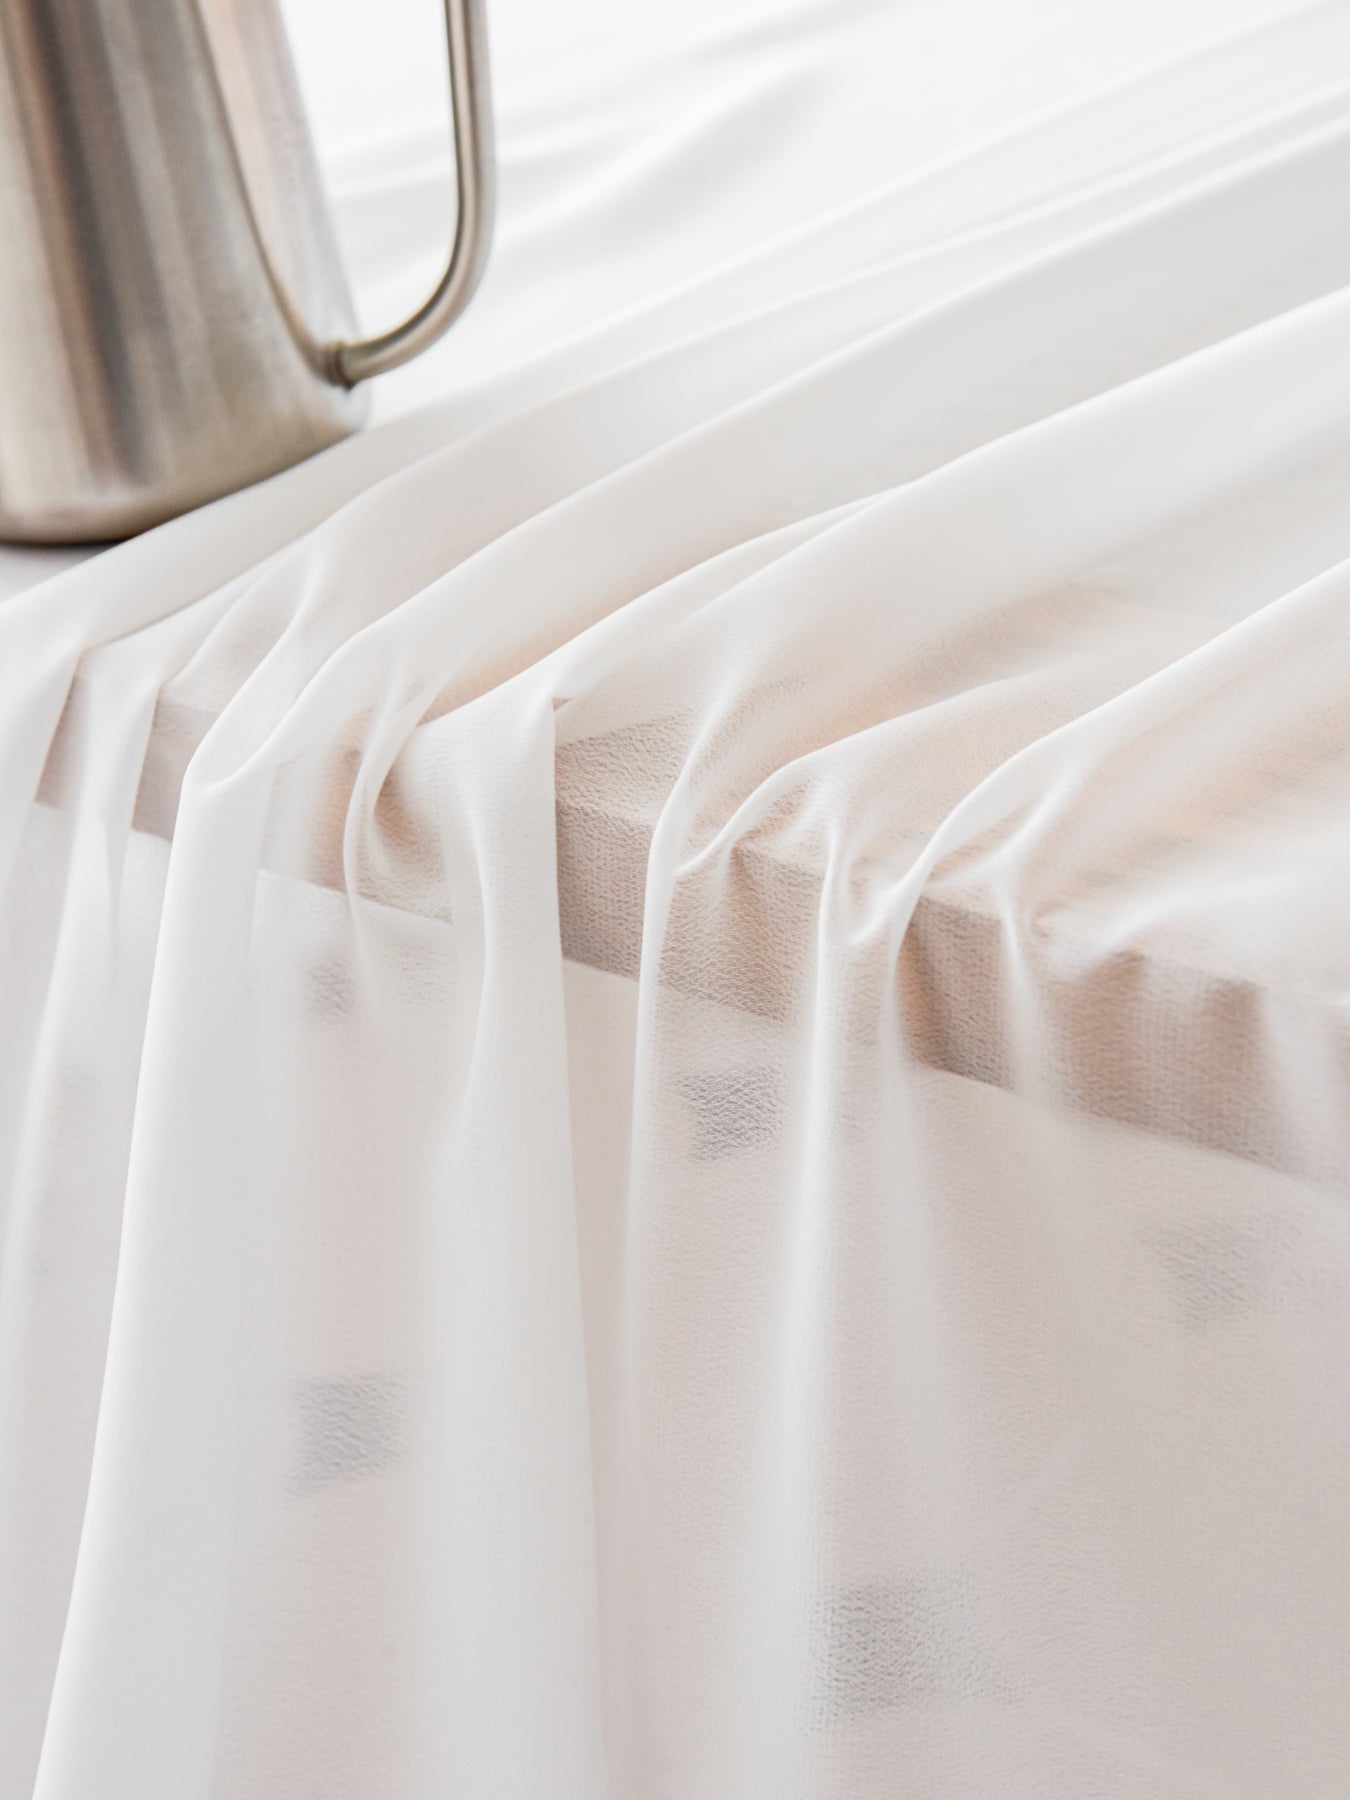 Close-up of semi-transparent white sheer curtains with delicate texturing and soft folds, demonstrating light permeability and room integration